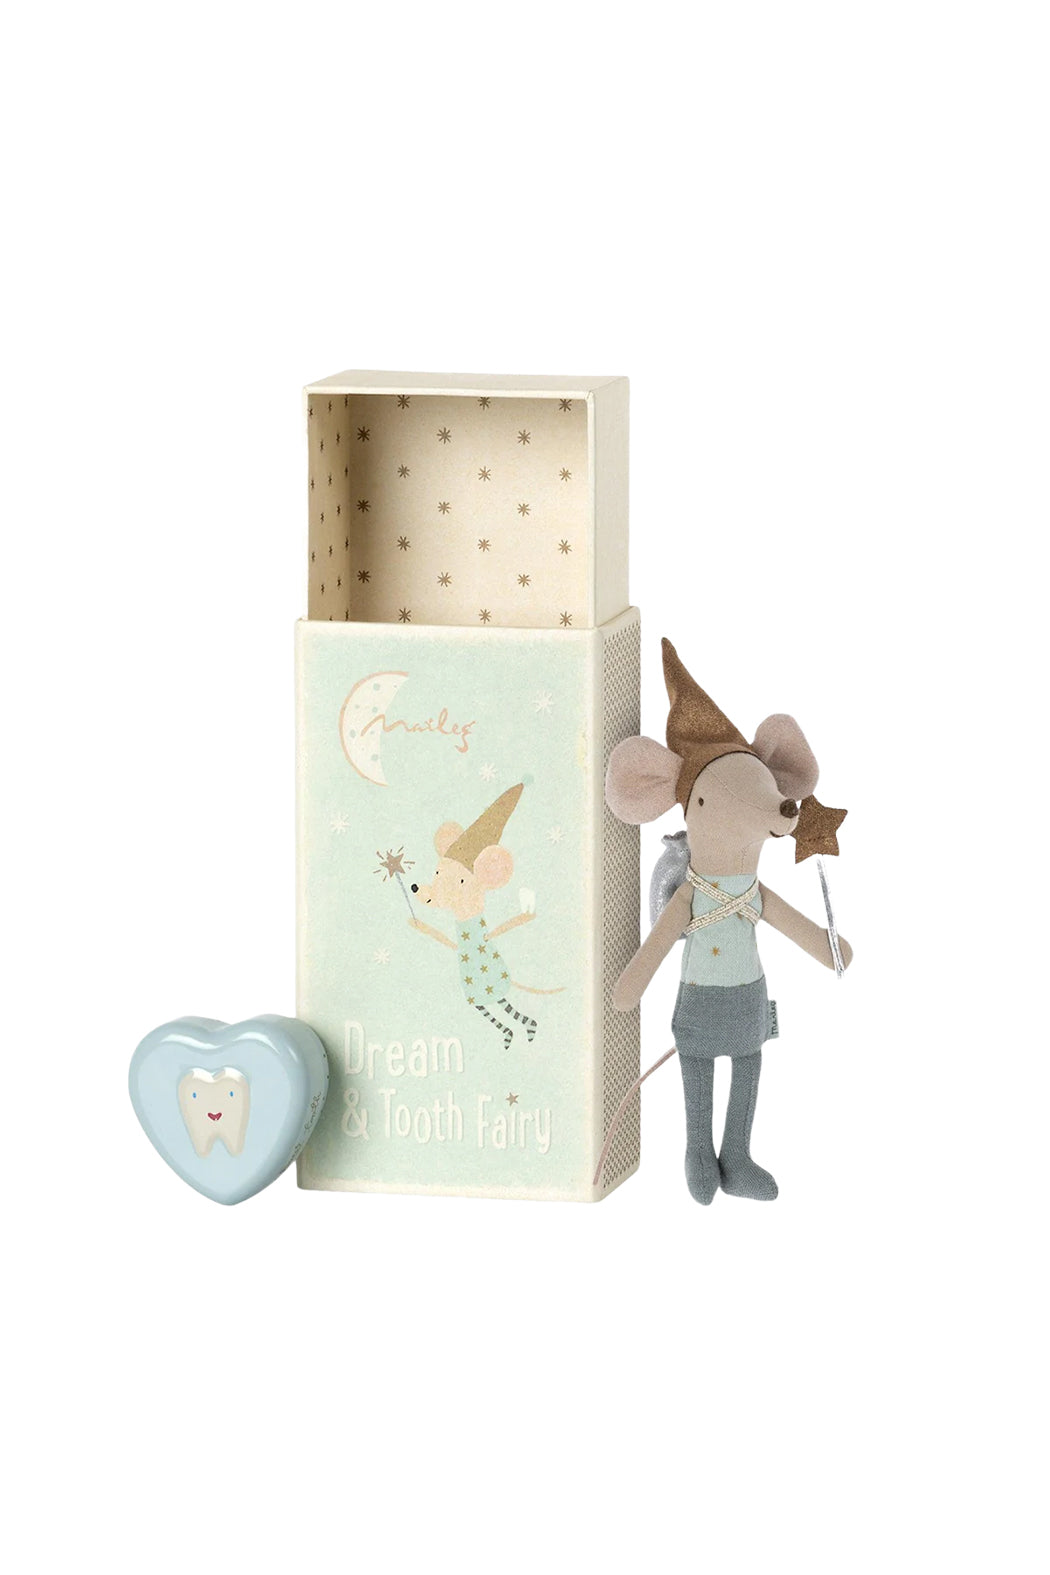 Maileg Dream & Tooth Fairy Mouse - Blue